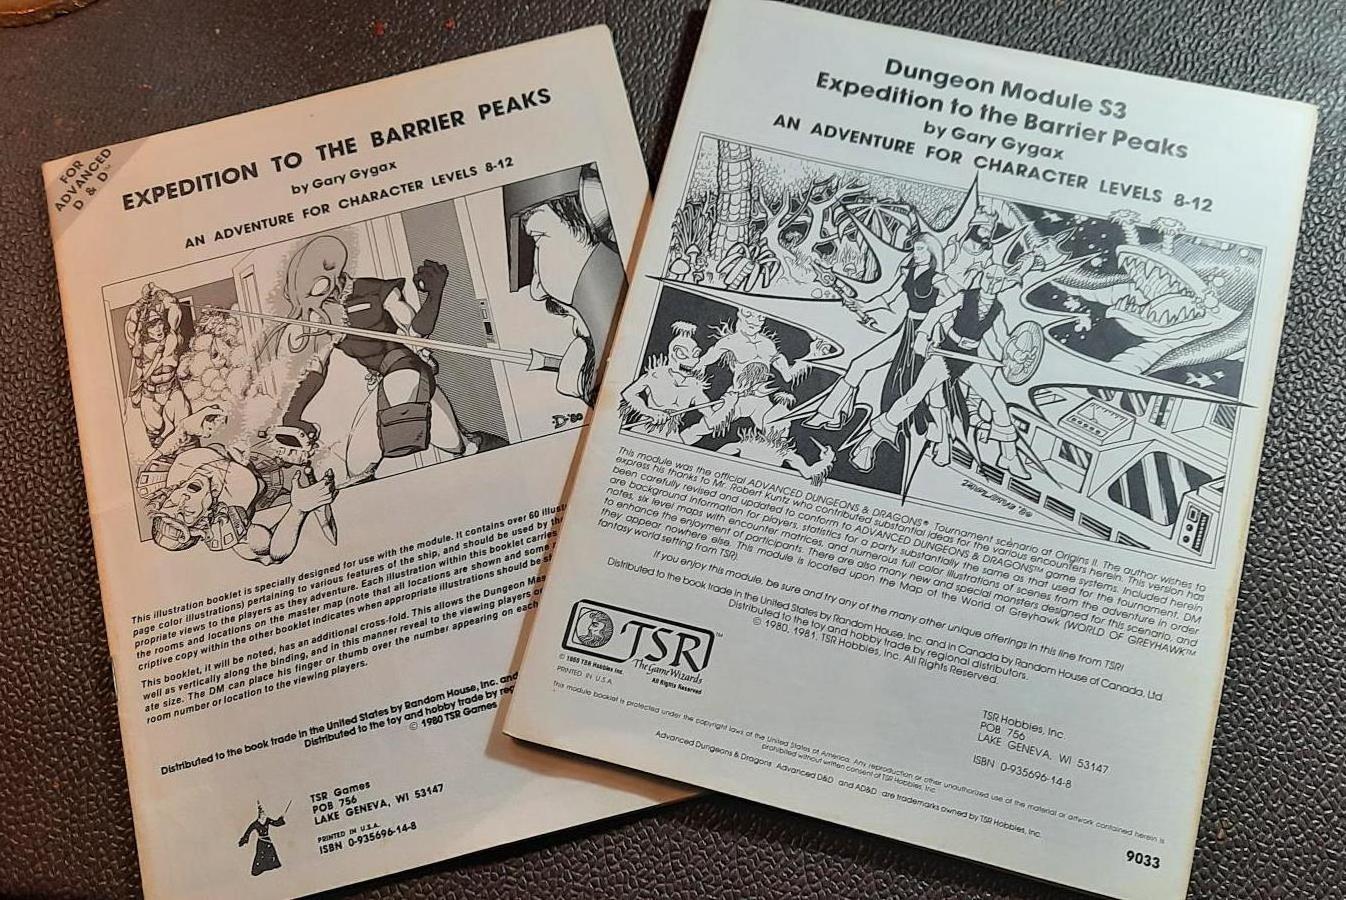 Copyright Tsr, Dungeons And Dragons, Expedition To The Barrier Peaks, Metamorphosis Alpha, Retro Review, Science Fiction